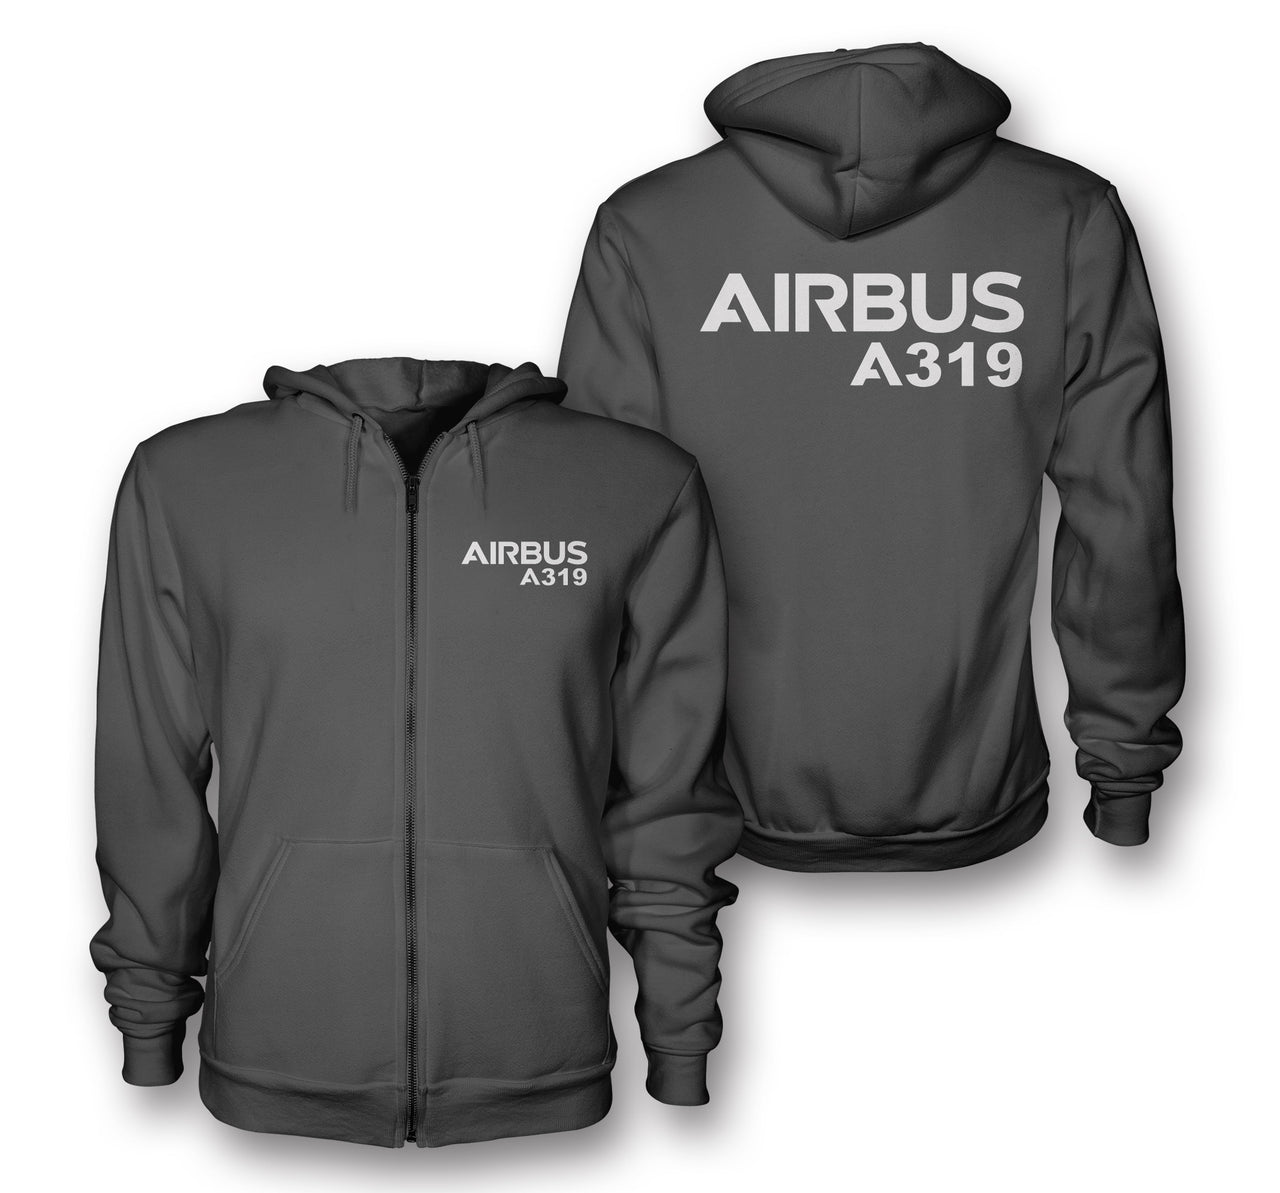 Airbus A319 & Text Designed Zipped Hoodies